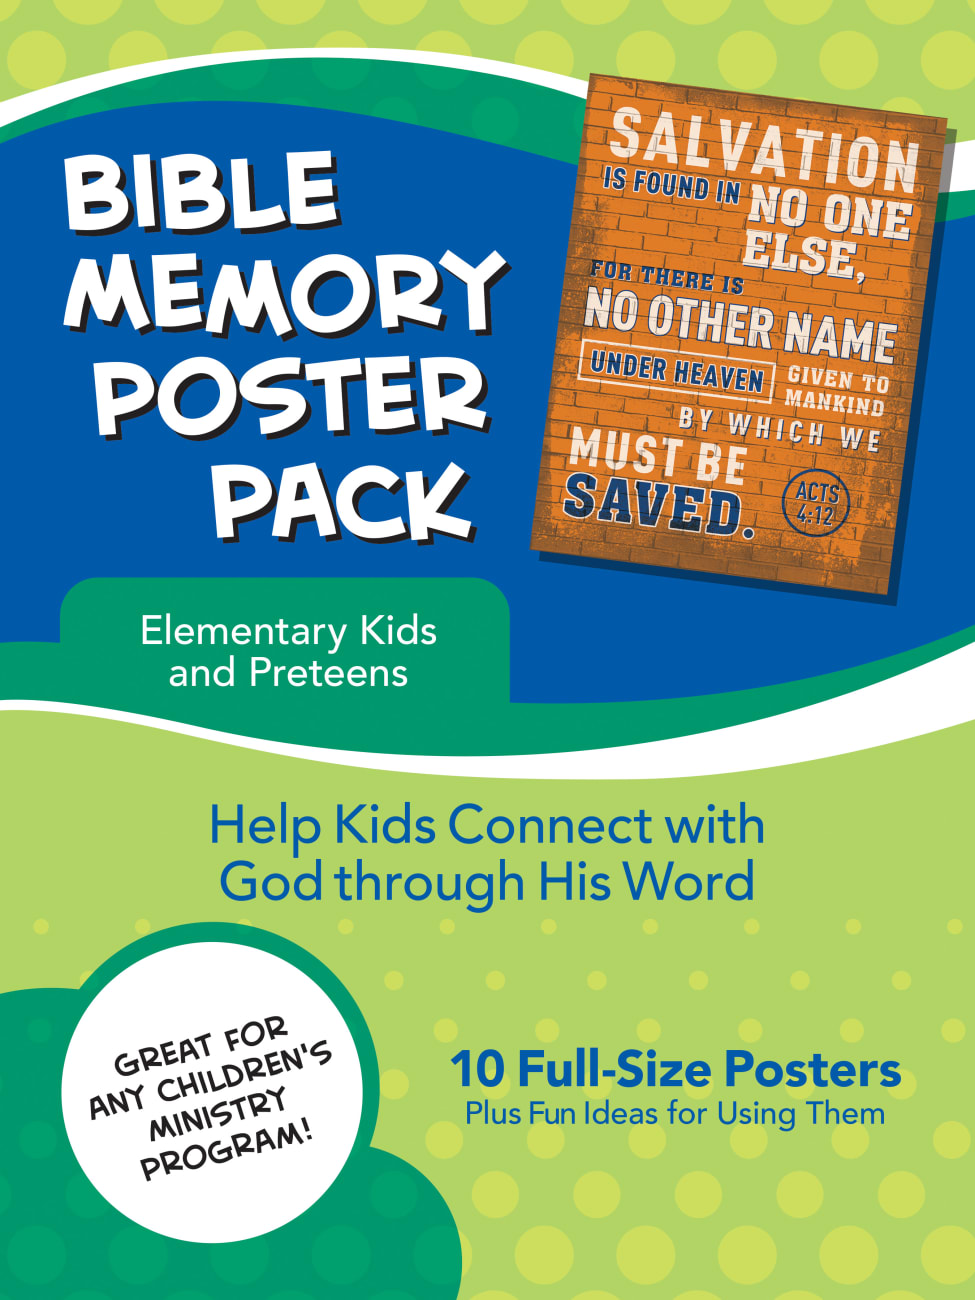 Bible Memory Poster Pack For Elementary Kids Posters